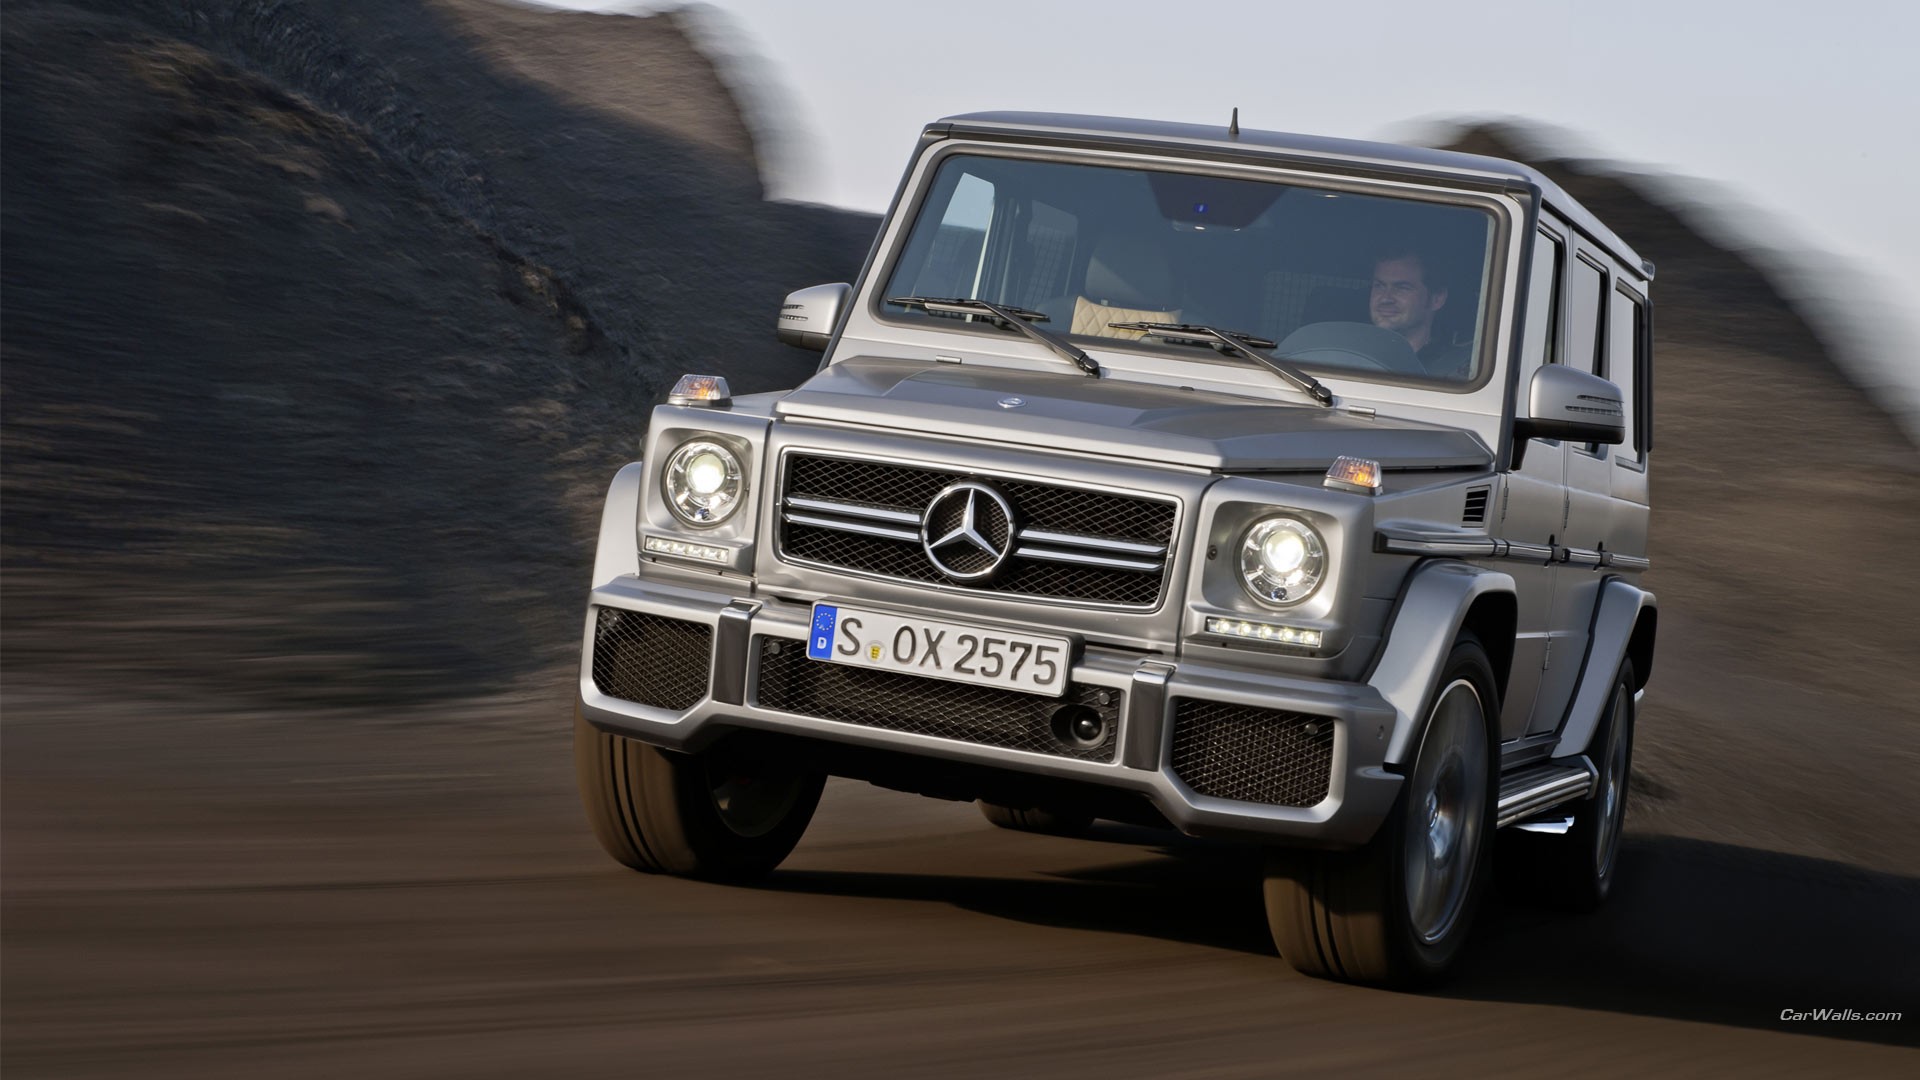 General 1920x1080 Mercedes-Benz numbers car vehicle silver cars Mercedes-Benz G-Class German cars SUV